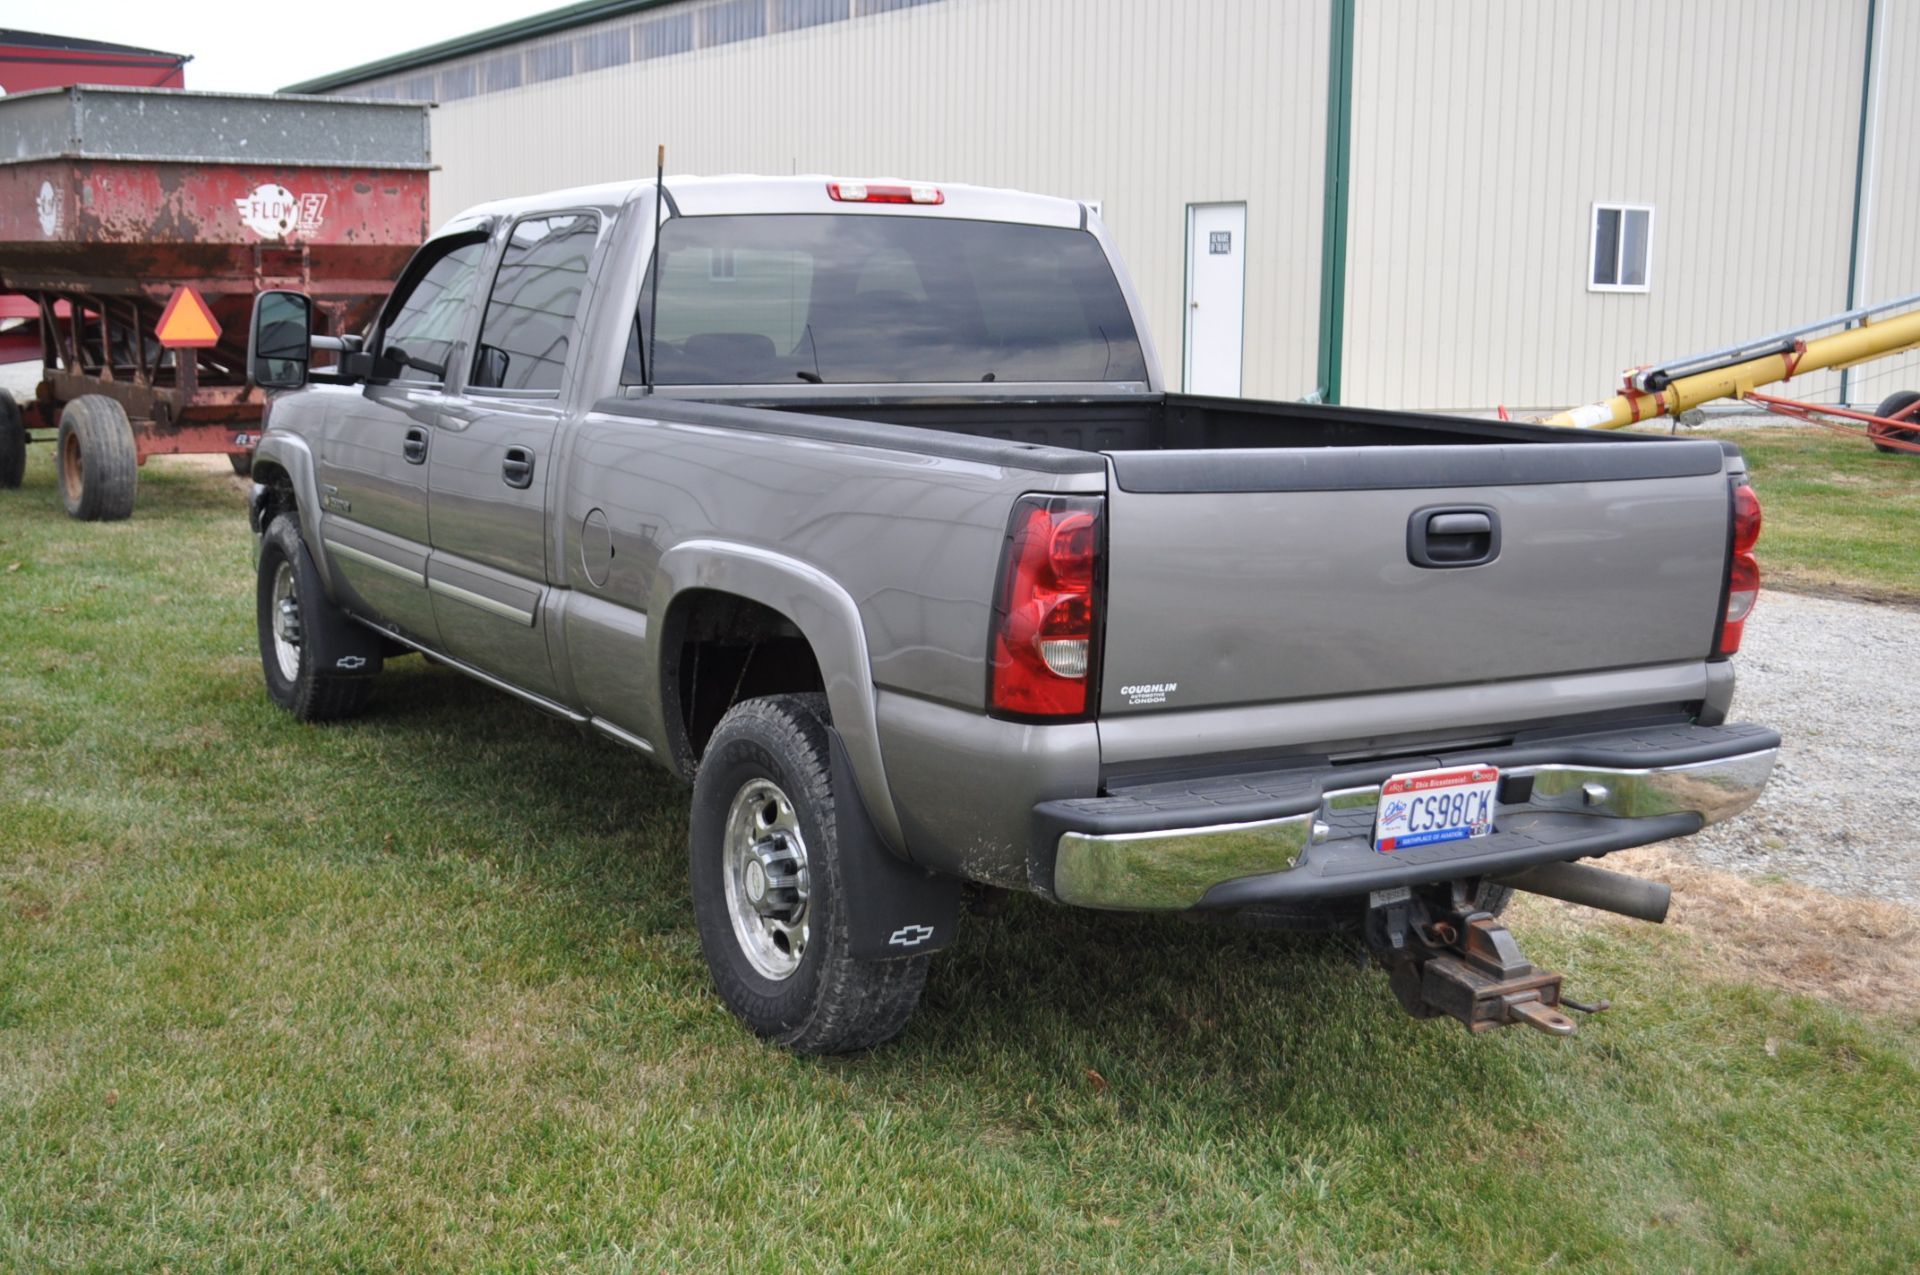 2006 Chevy 2500 HD Duramax pick-up truck, 4x4, short bed, auto, cloth interior, Rhino bed liner, B & - Image 2 of 20